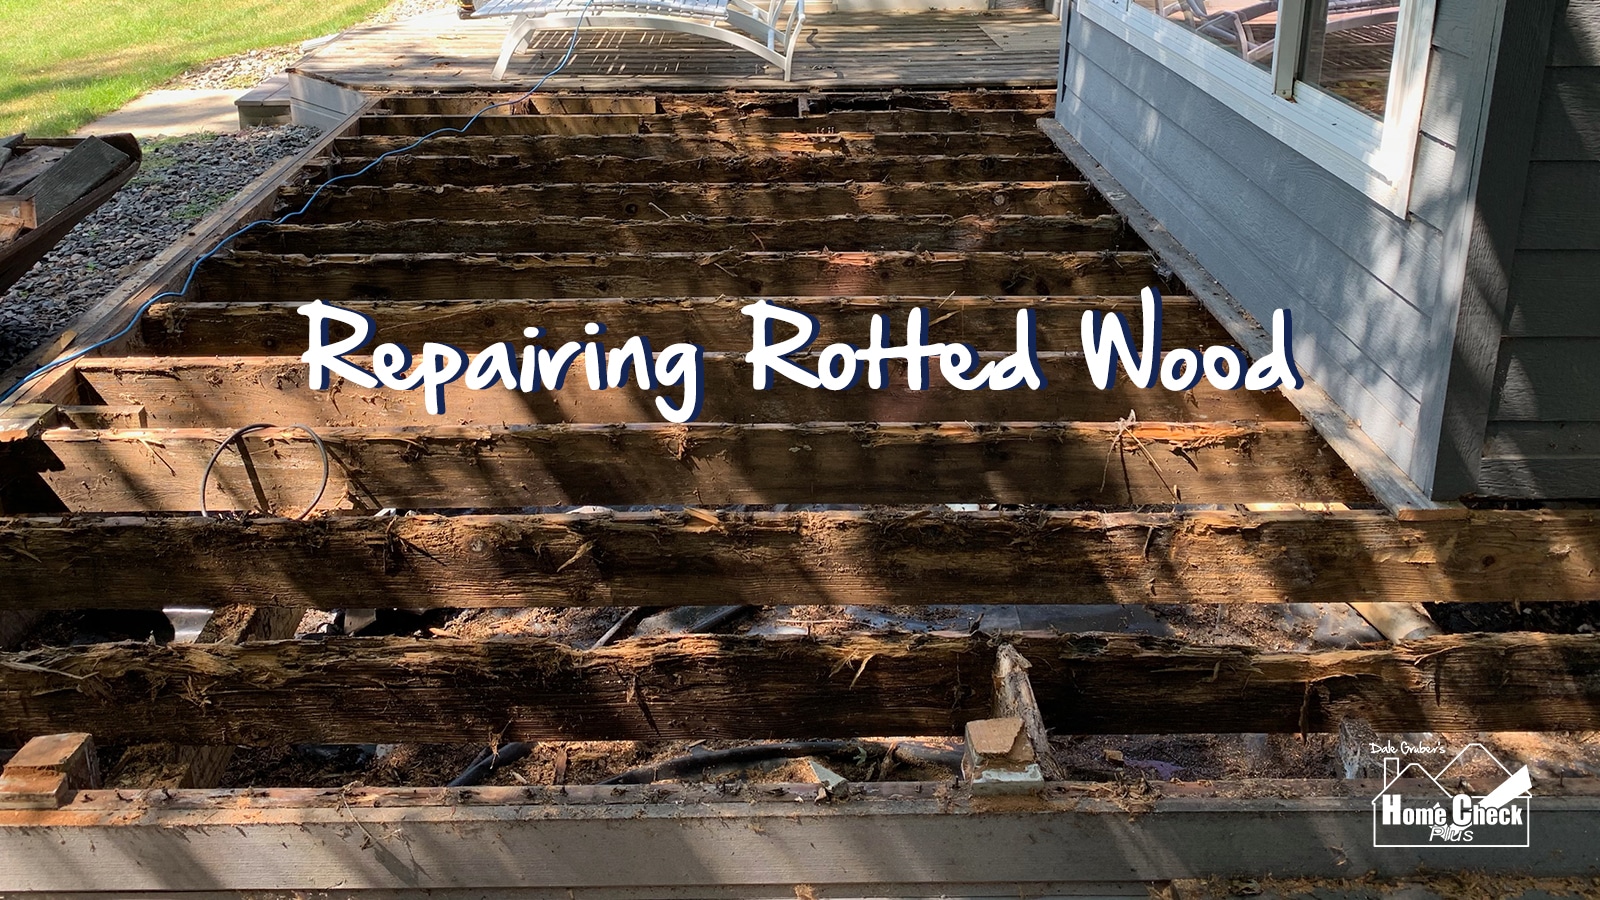 Repairing Rotted Wood